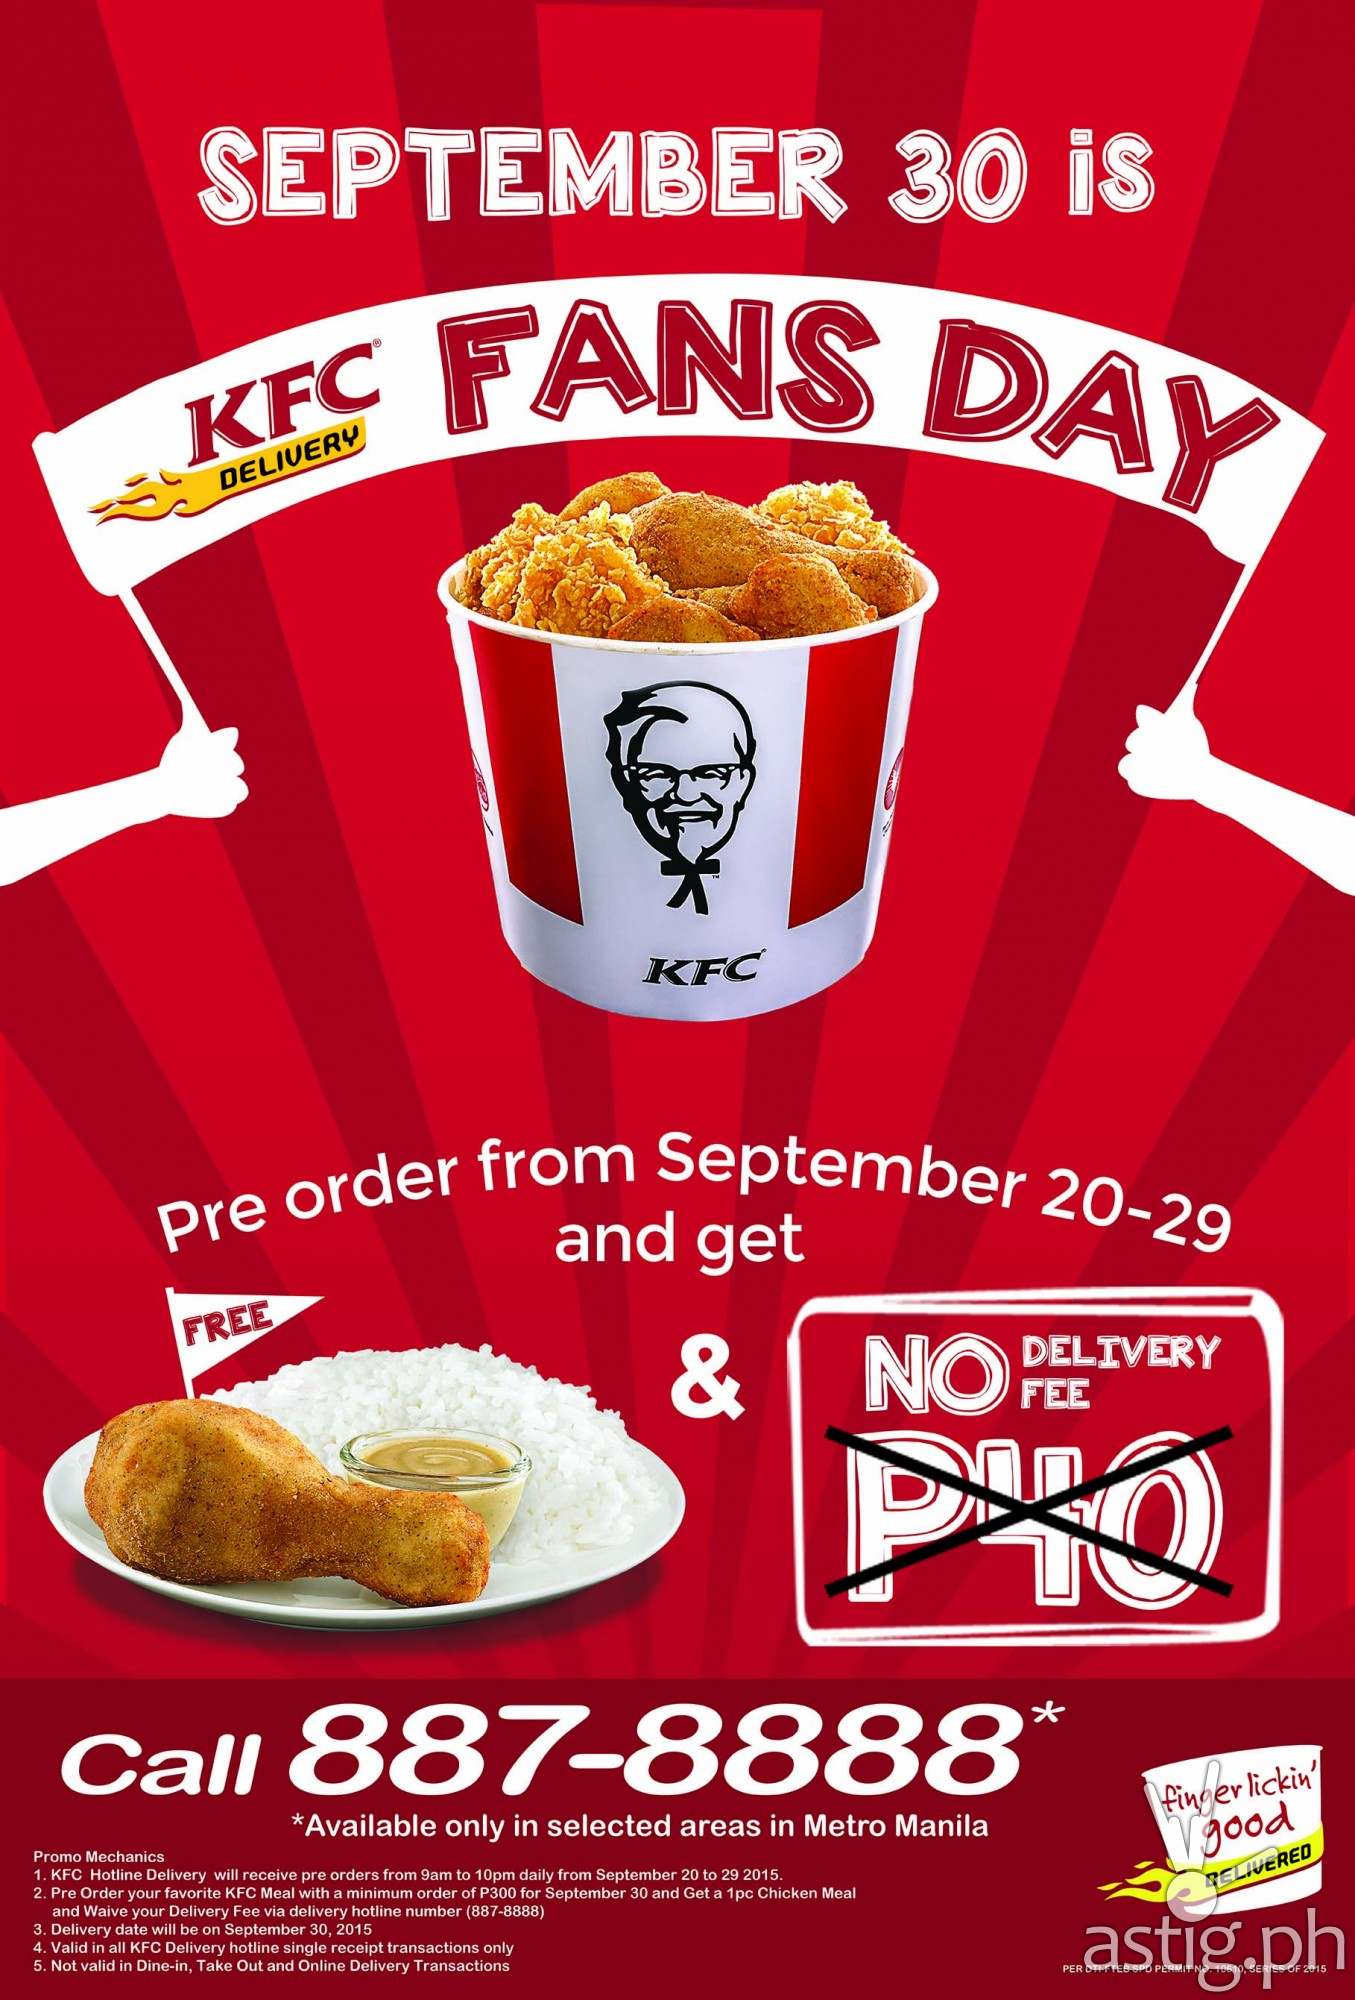 KFC Delivery Fans Day